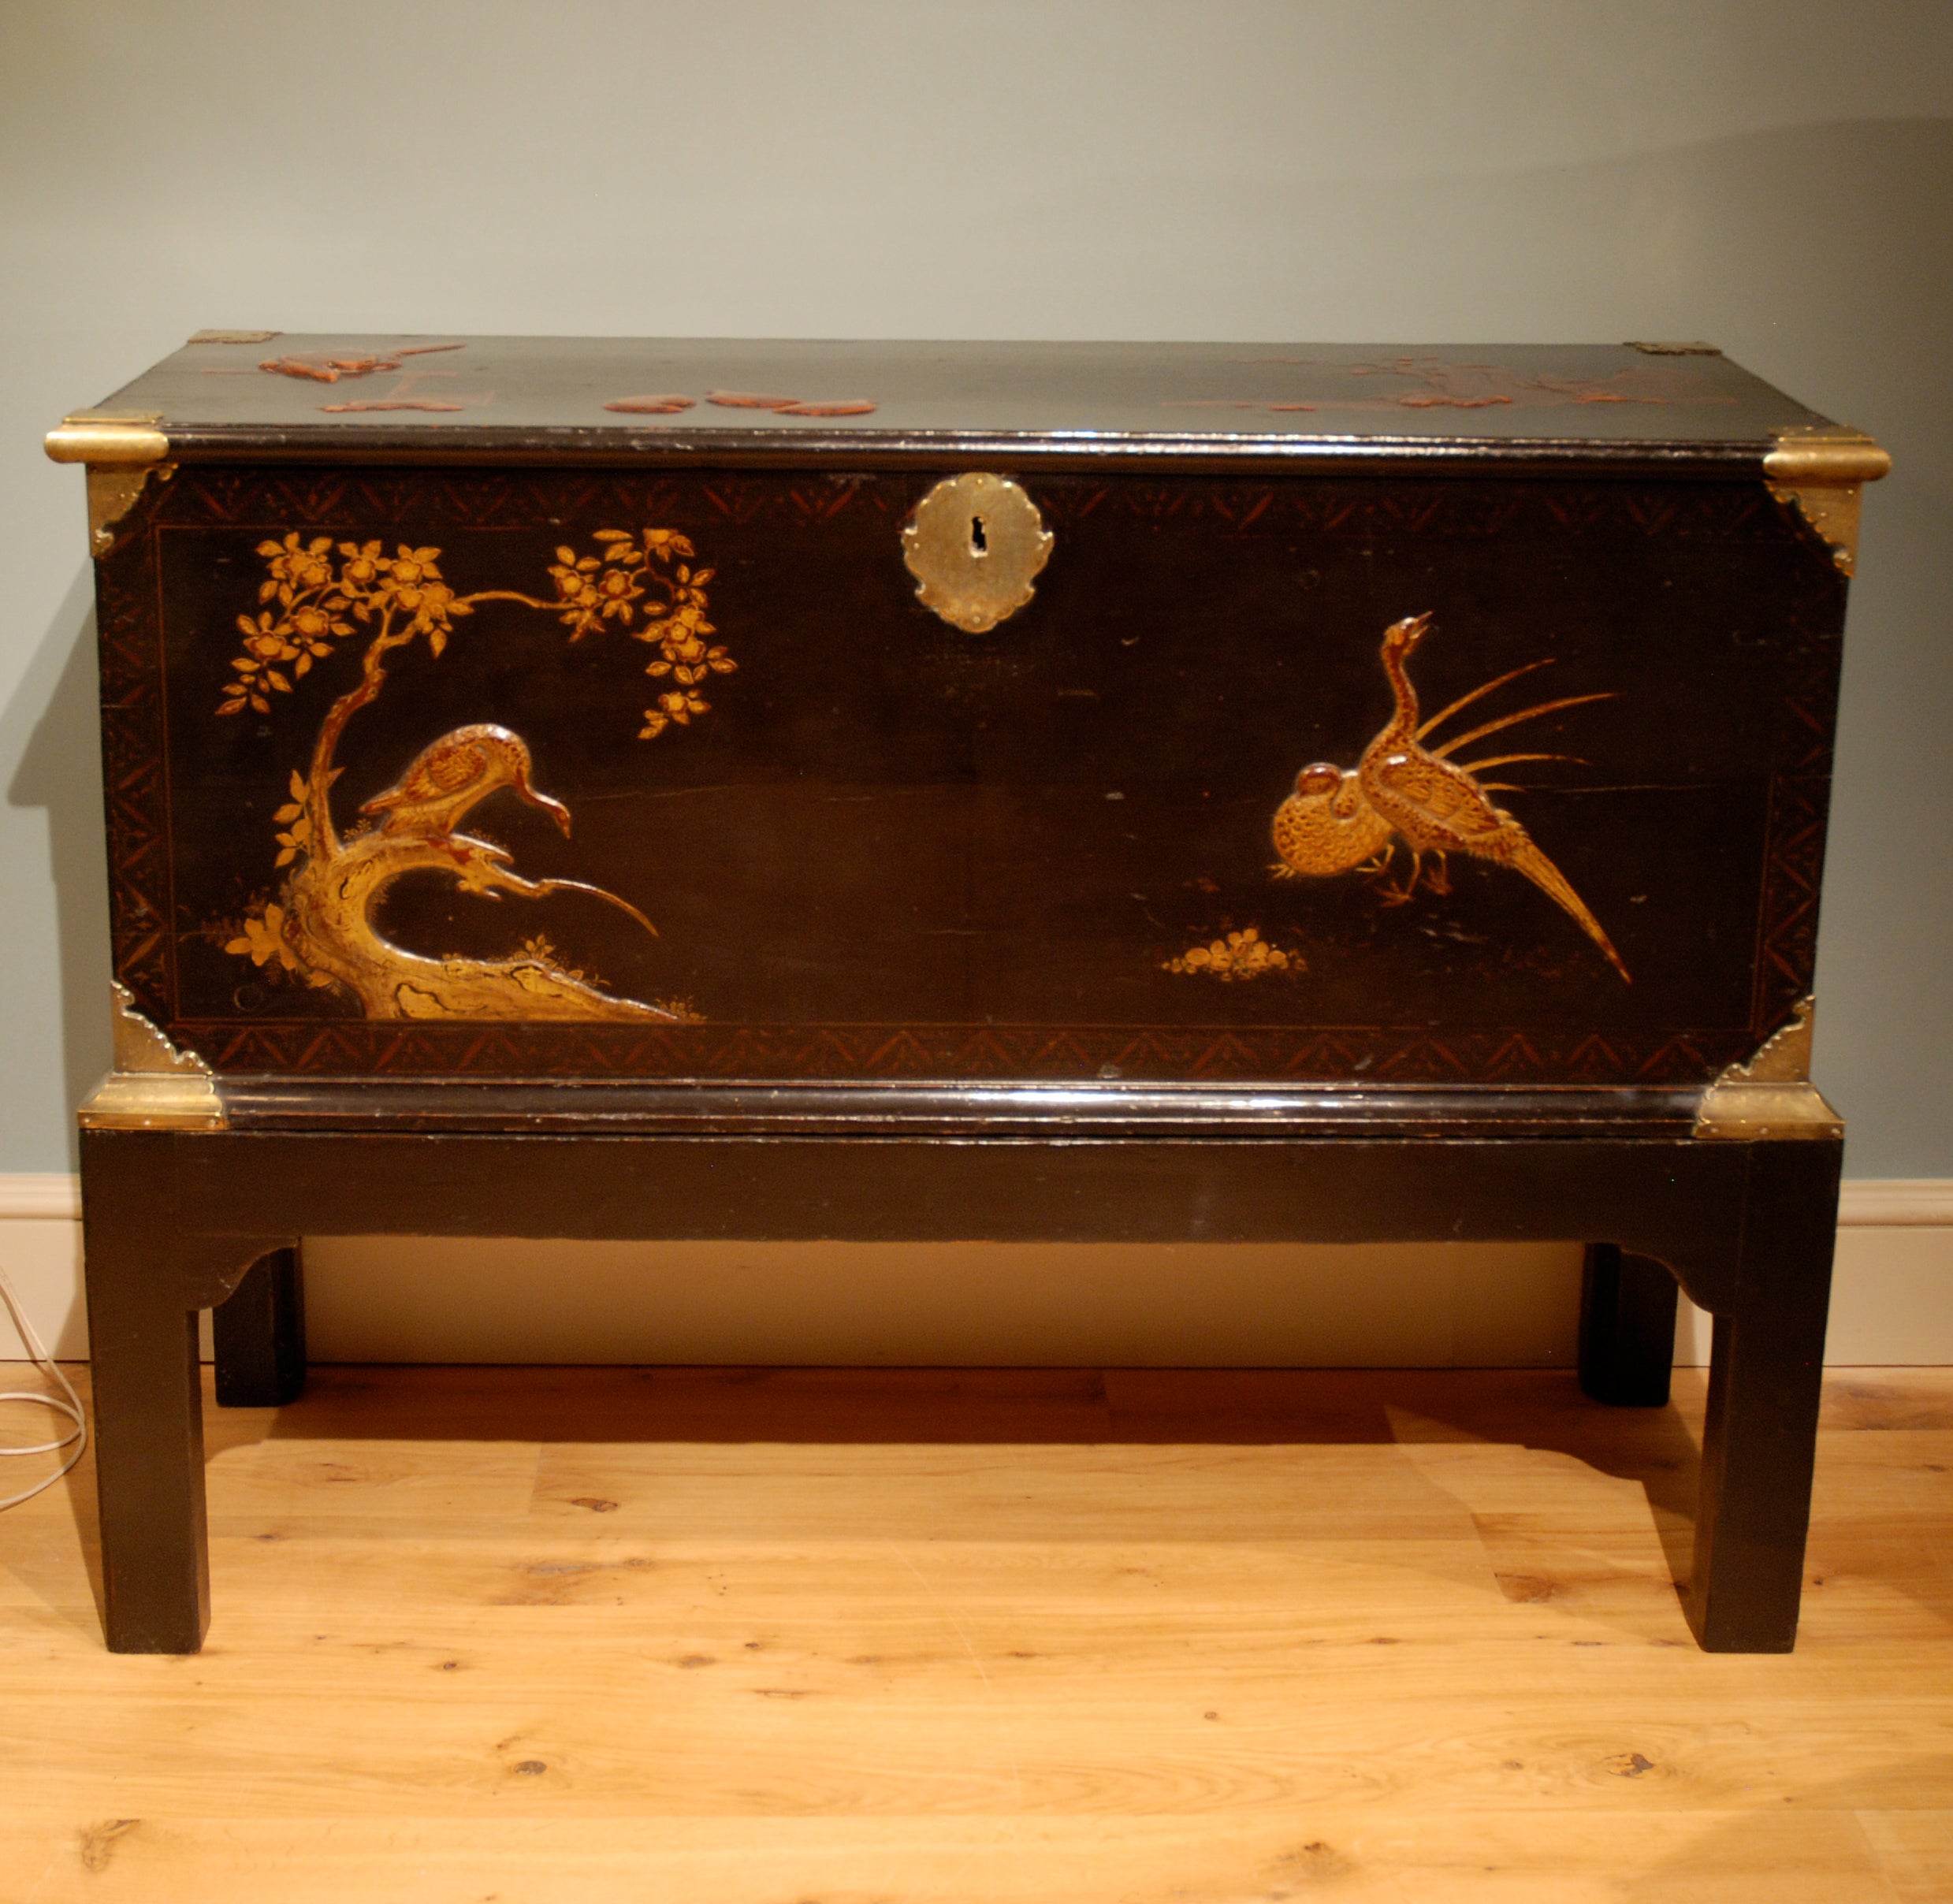 A late 17th century Japanese lacquer trunk.